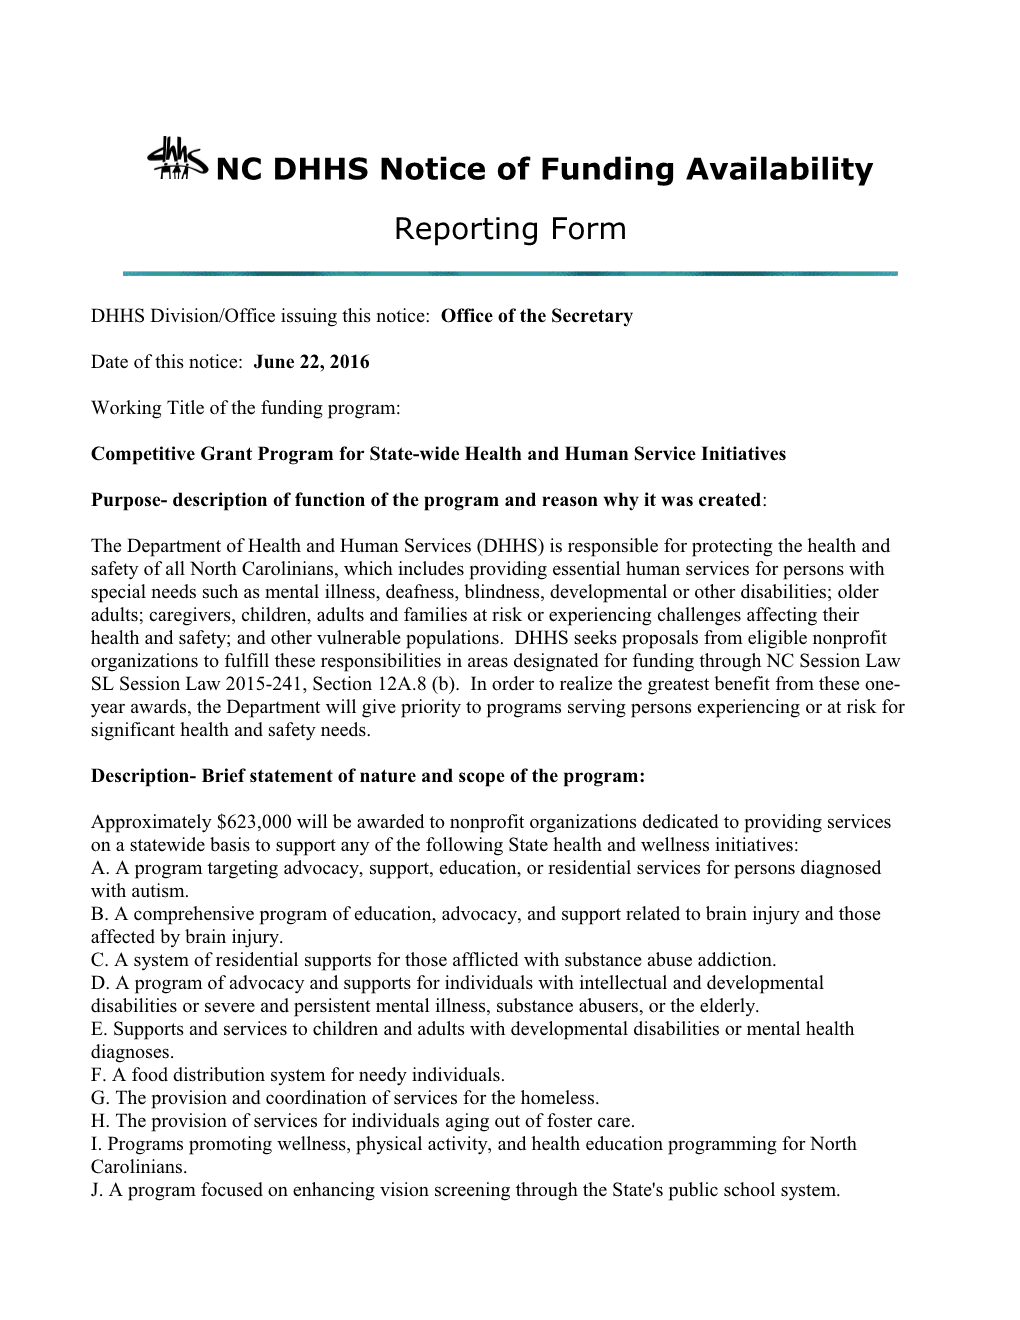 NC DHHS Notice of Funding Availability s2